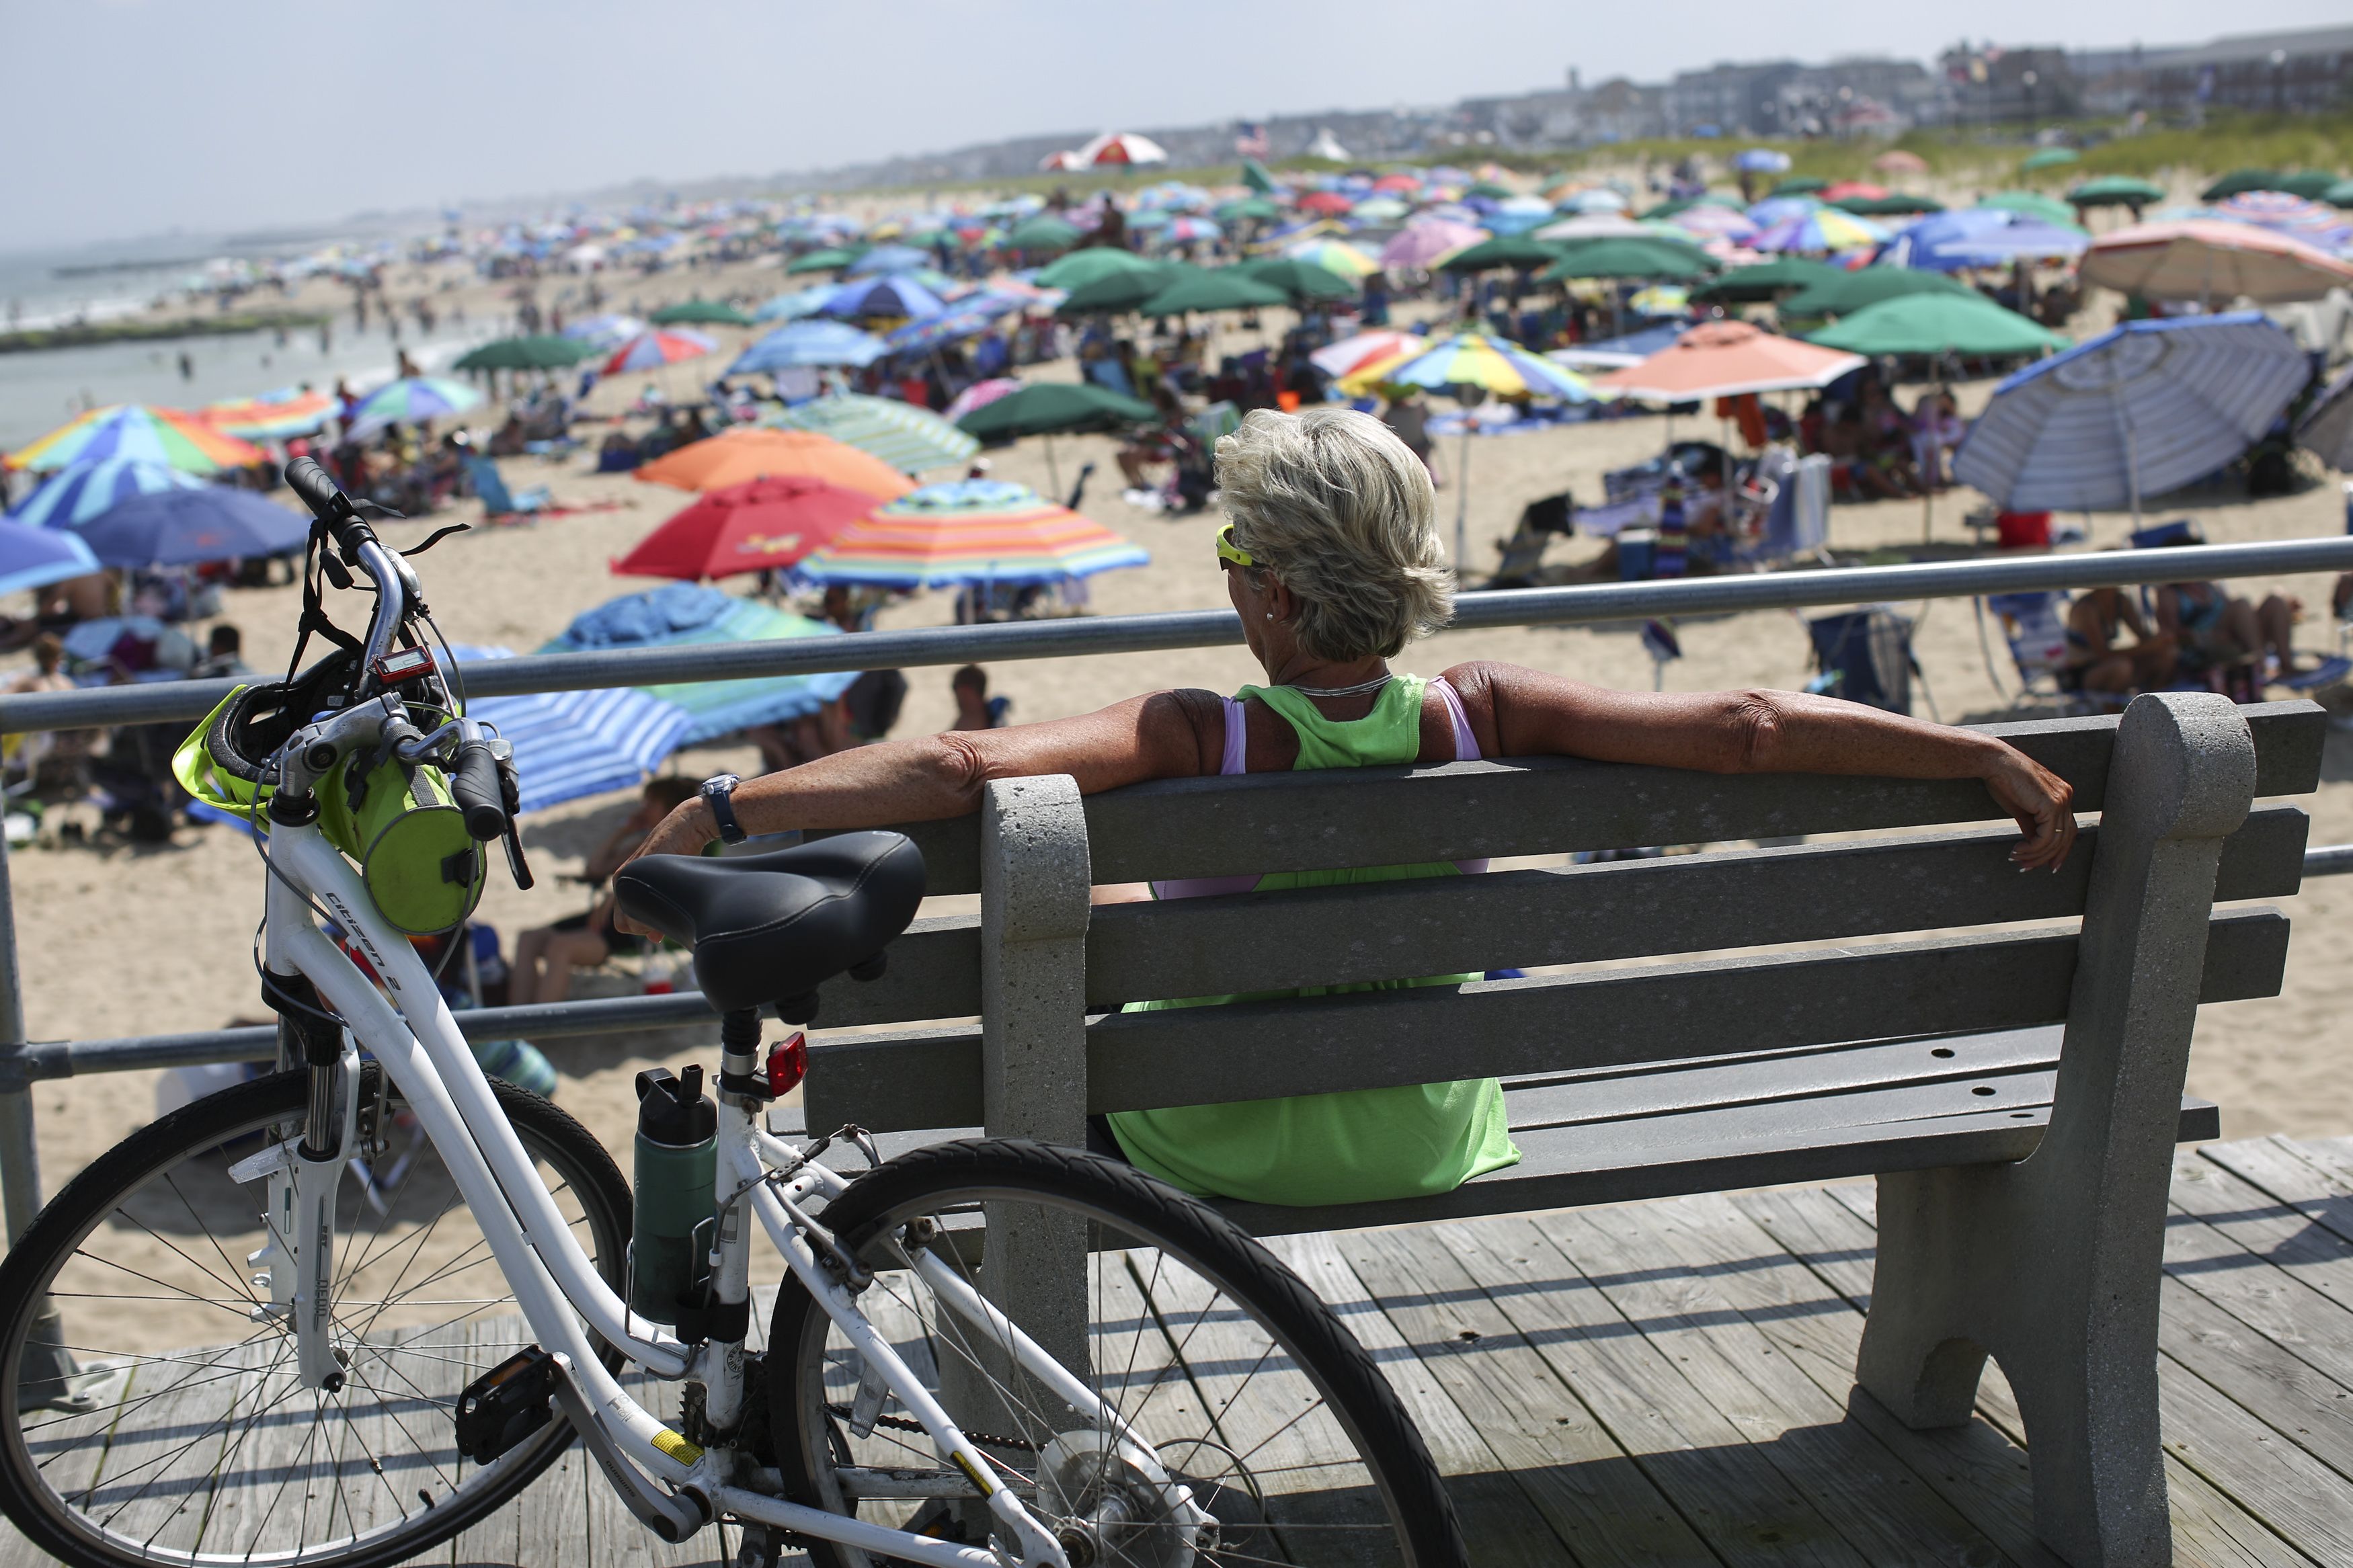  People visit the beach on July 20, 2019 in Ocean Grove, New Jersey.